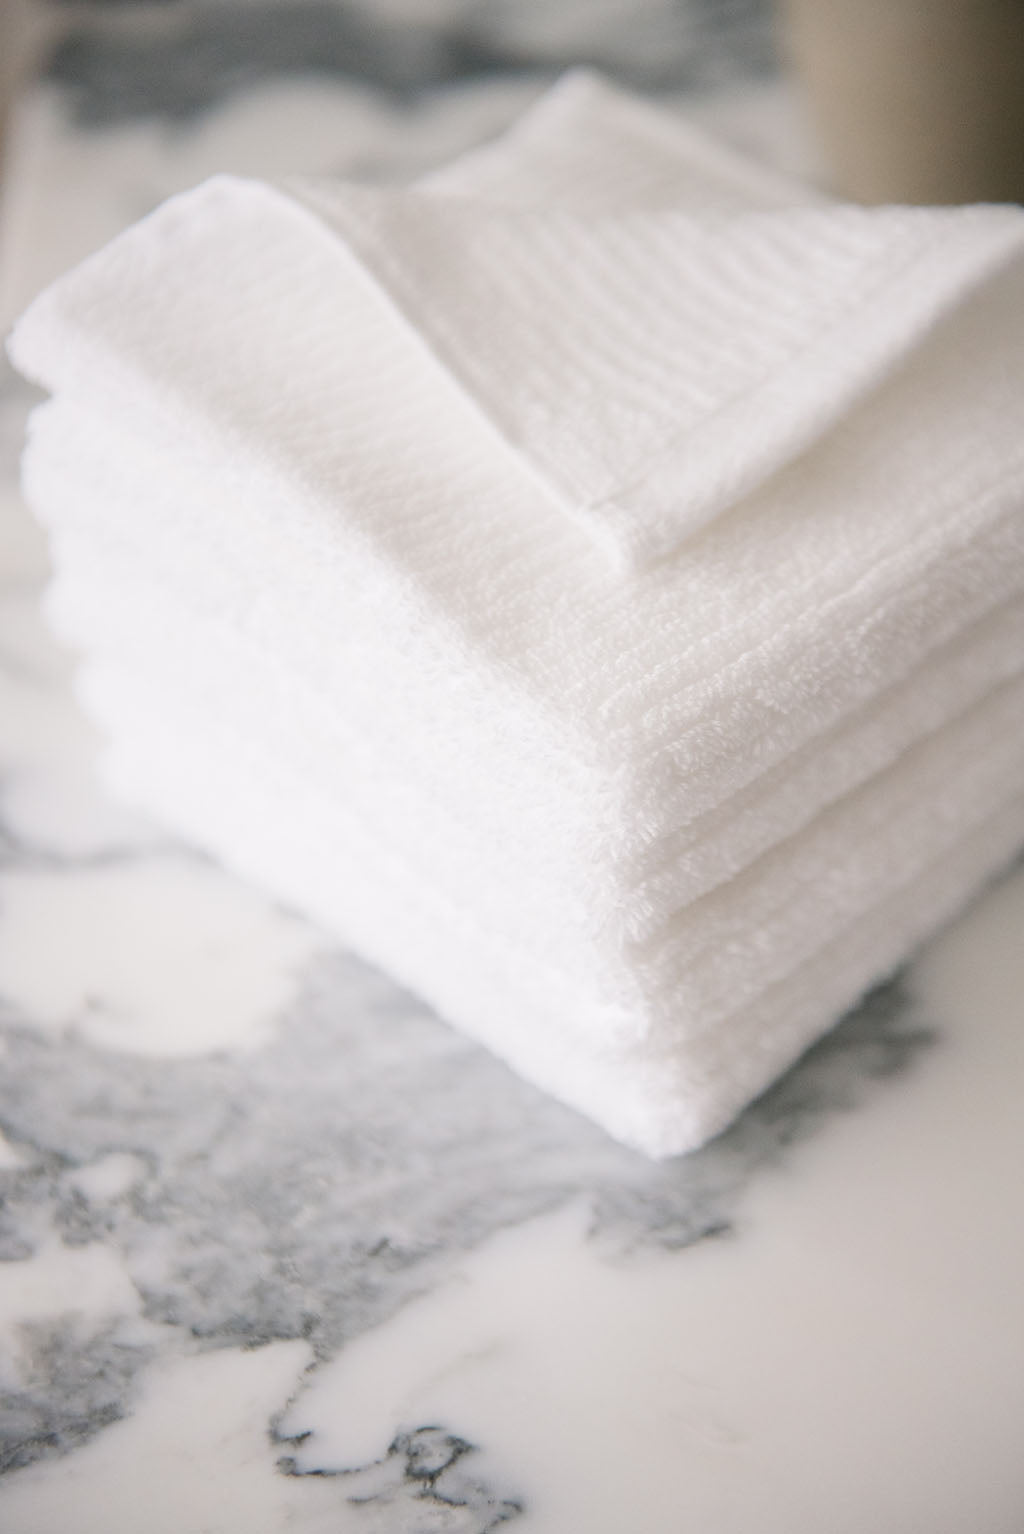 Ribbed Terry Wash Cloths in the color White. Photo of product taken on white marble sink. |Color:White